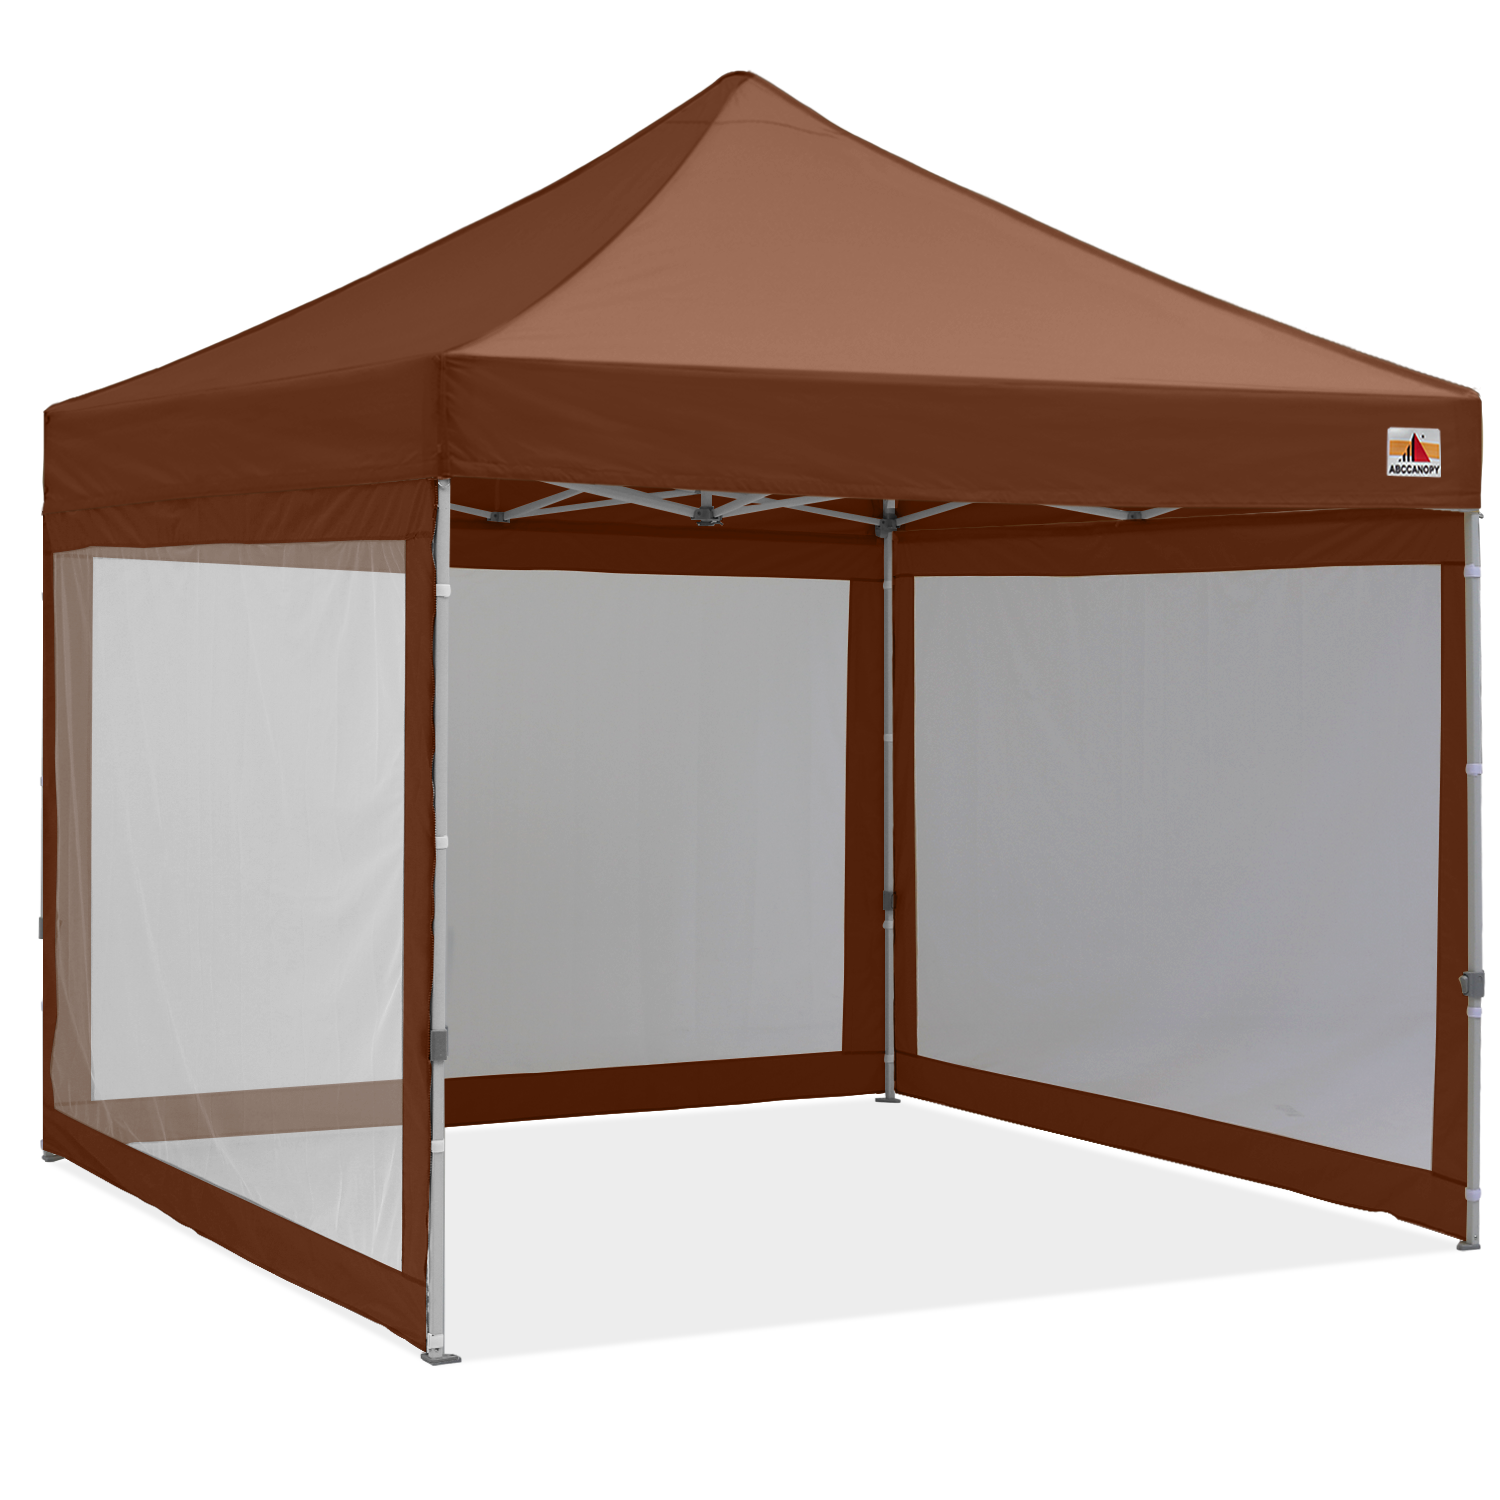 S1 Commercial Easy Set-up Portable 10x10 Canopy with Mesh Walls